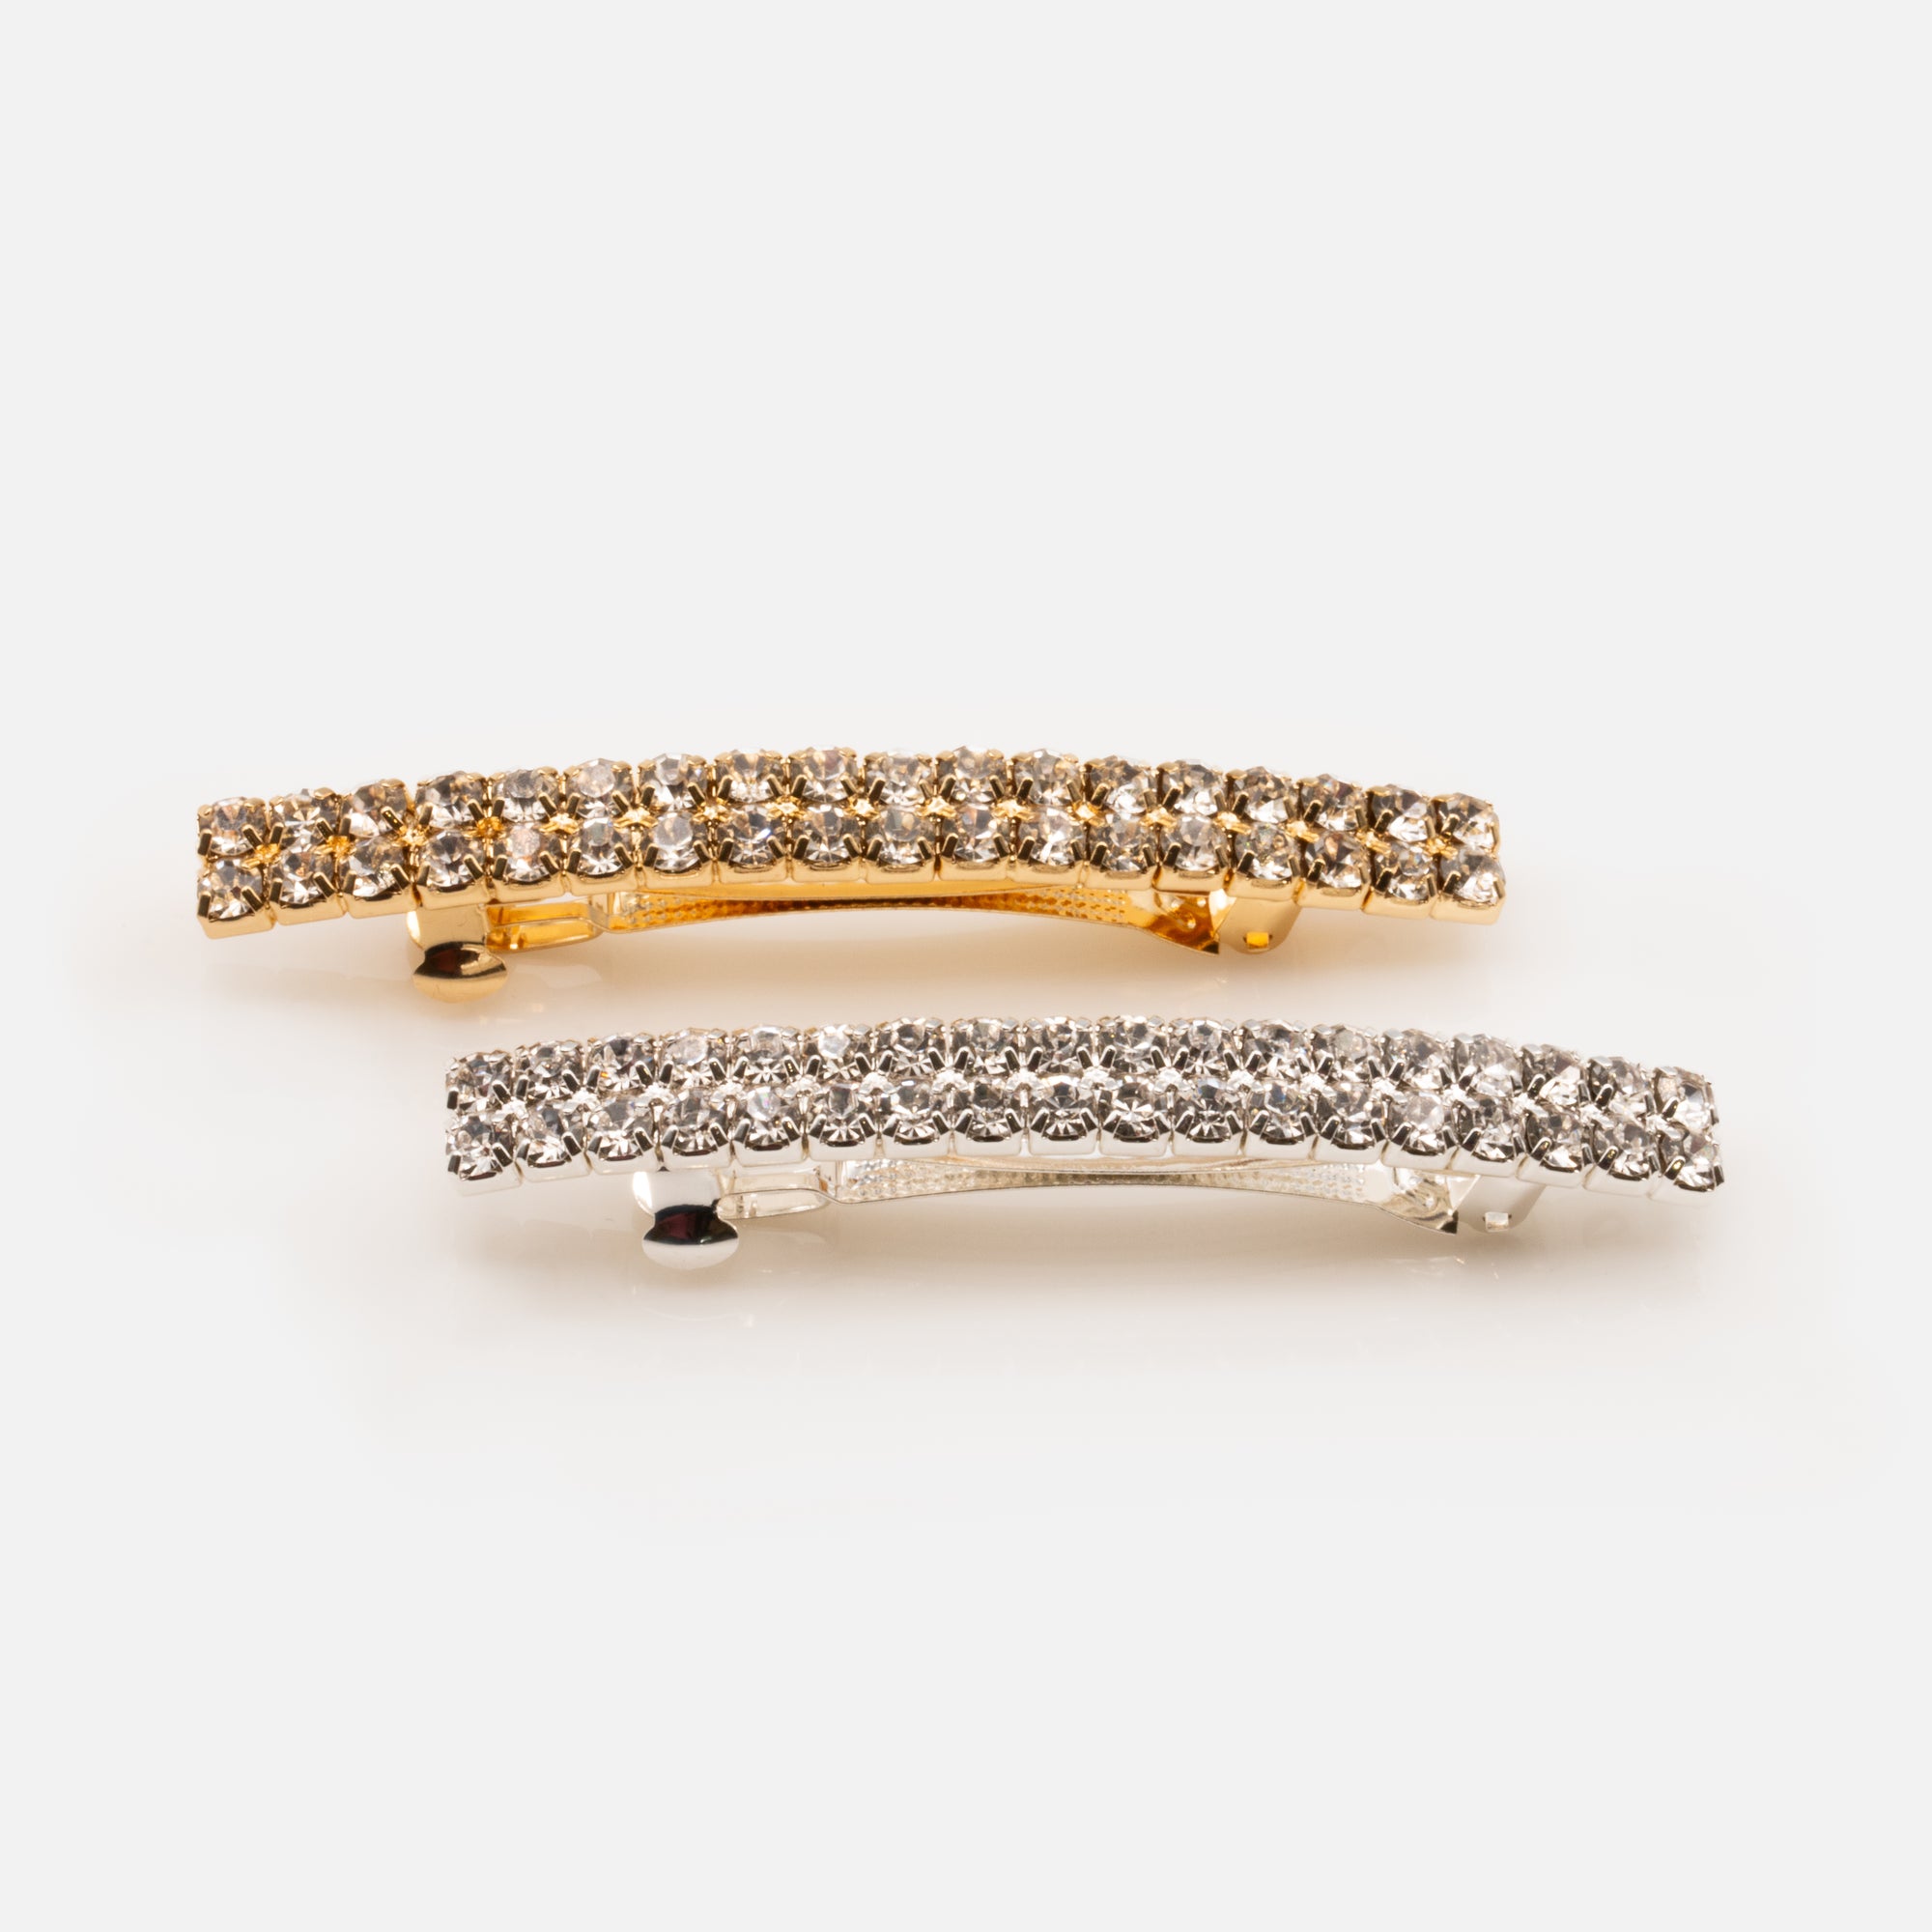 Duo of gold and silver barrettes with stones